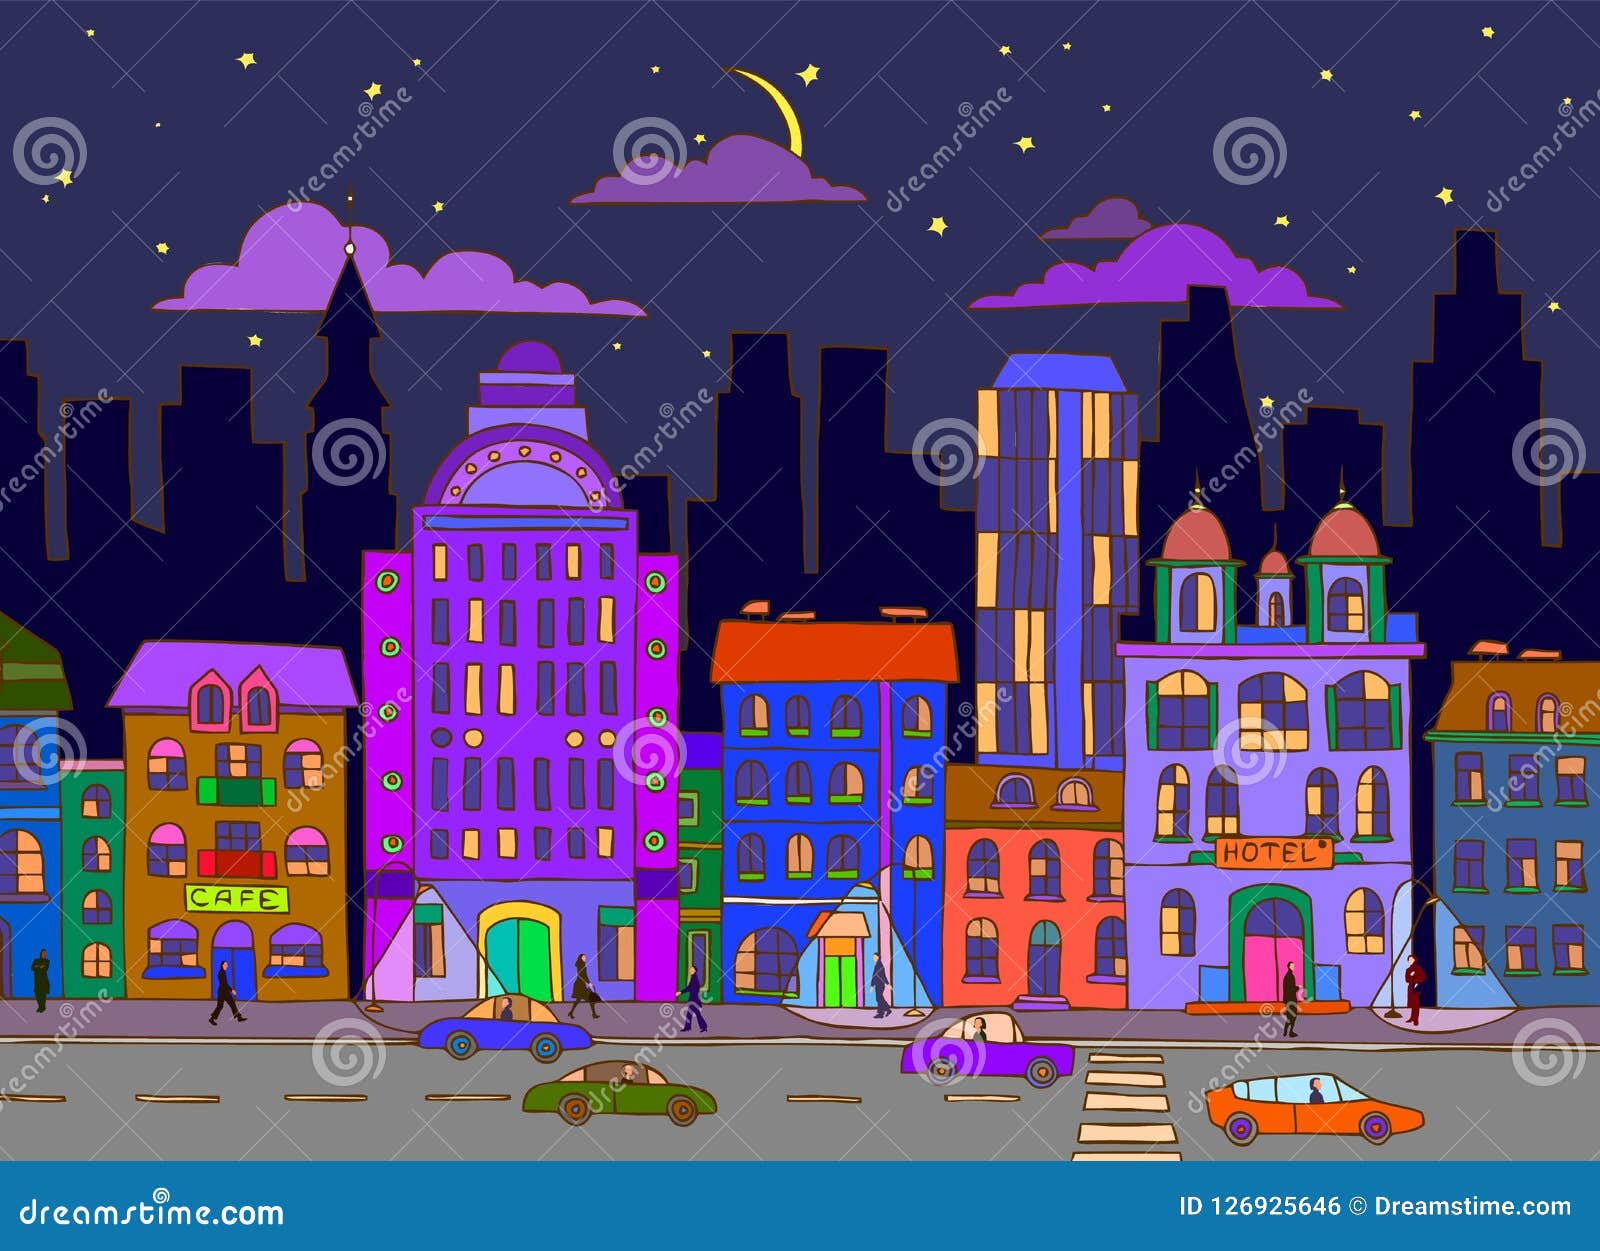 Night City Hand Drawn Background Stock Vector - Illustration of vector